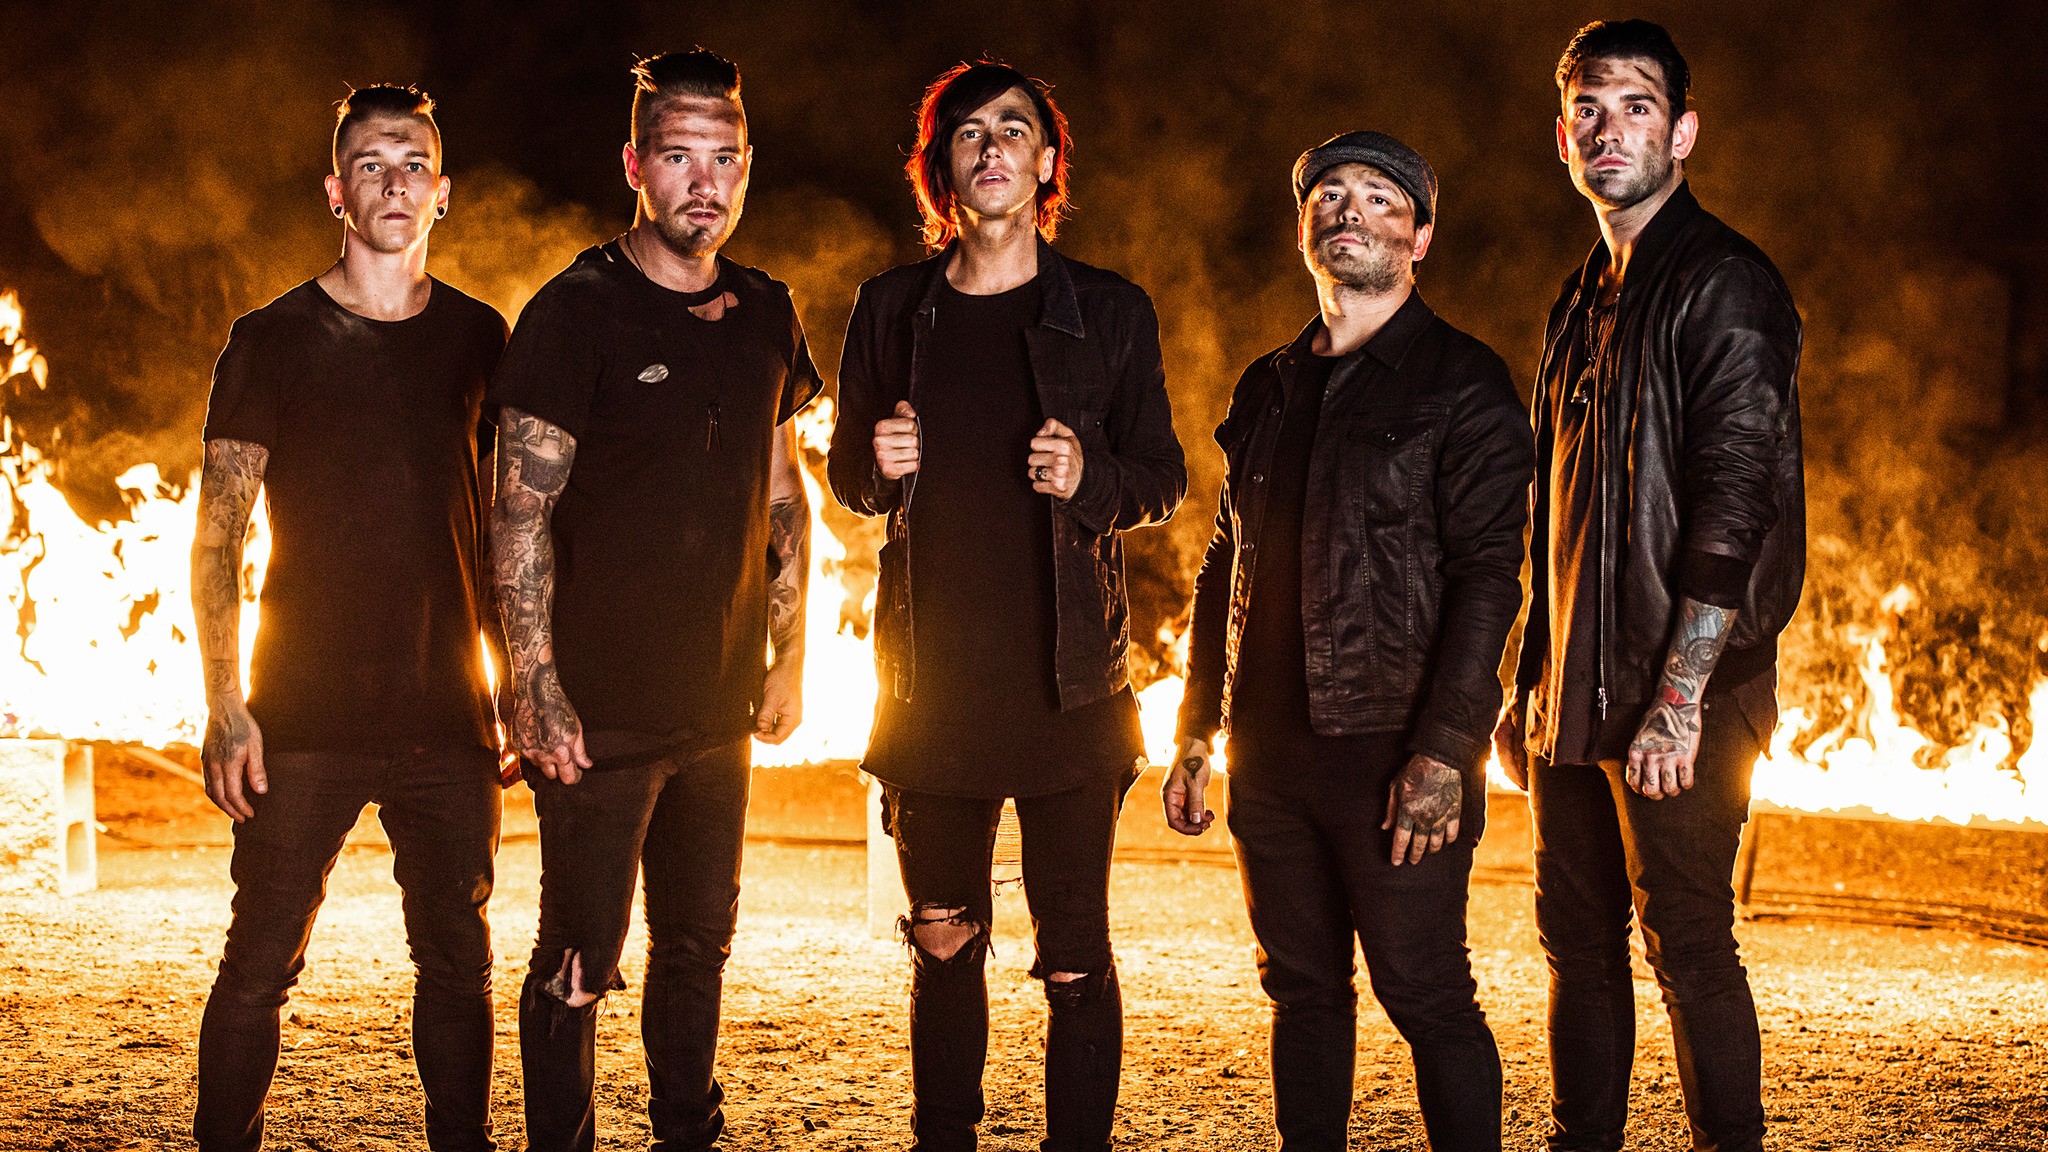 Sleeping With Sirens announce UK shows & video for new track ‘Legends’ from new album ‘Gossip’